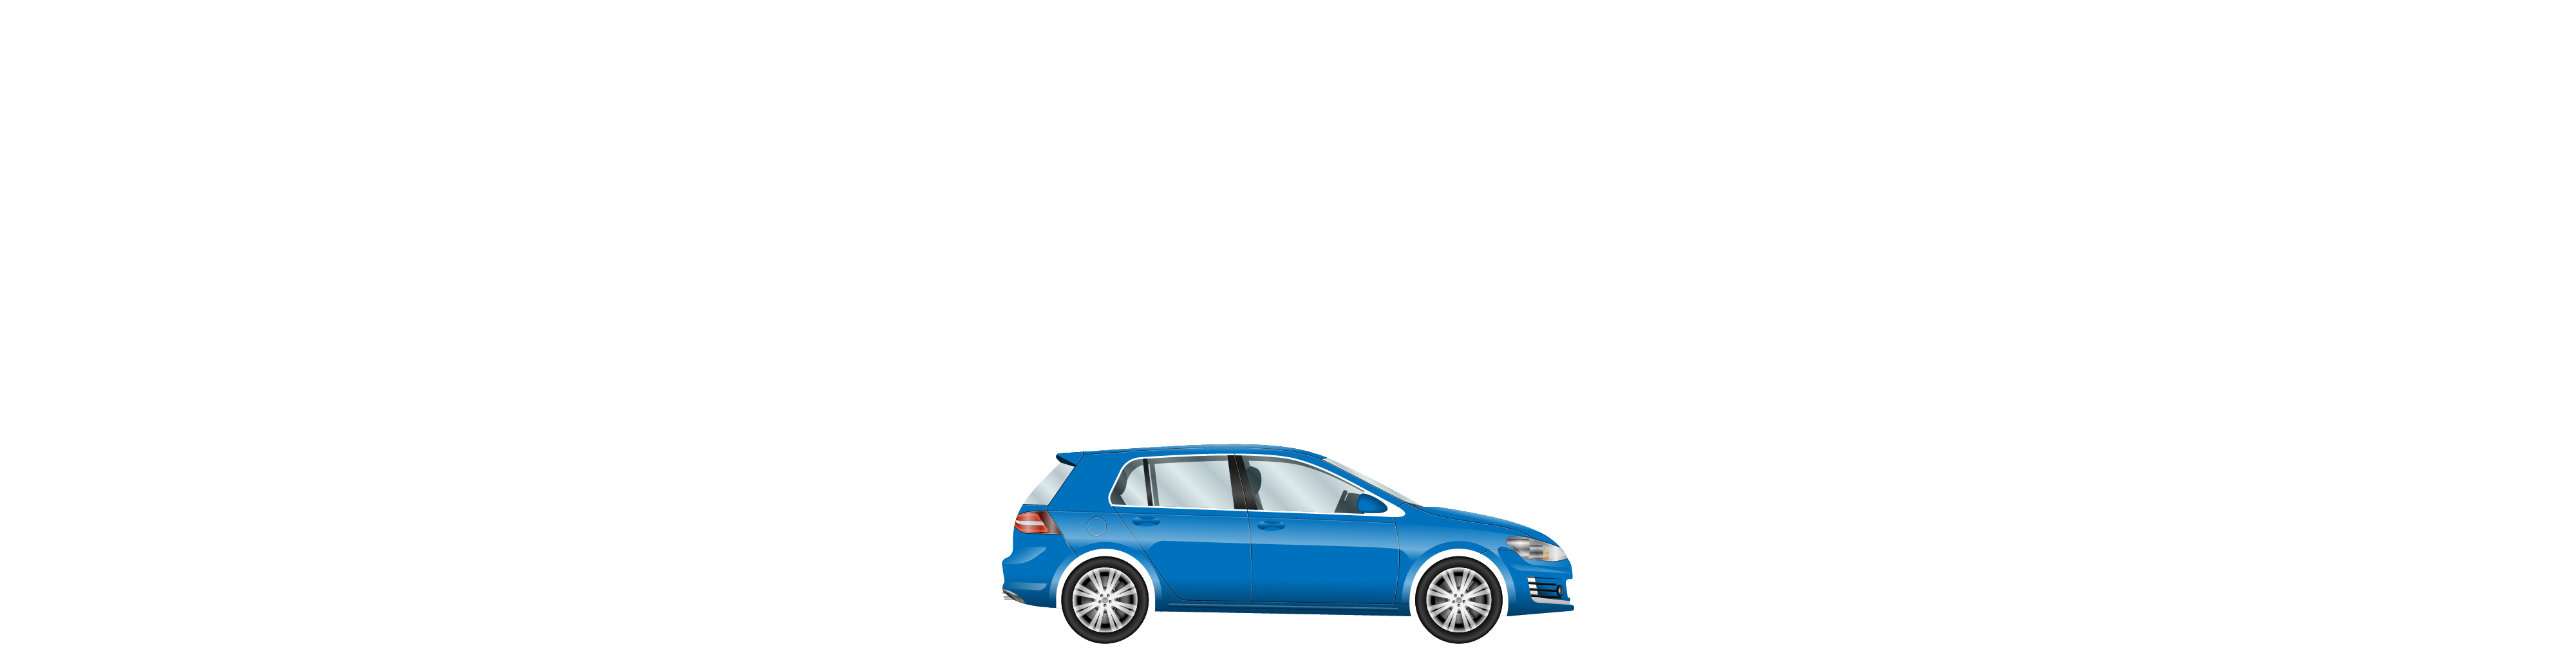 Car driving through City background image